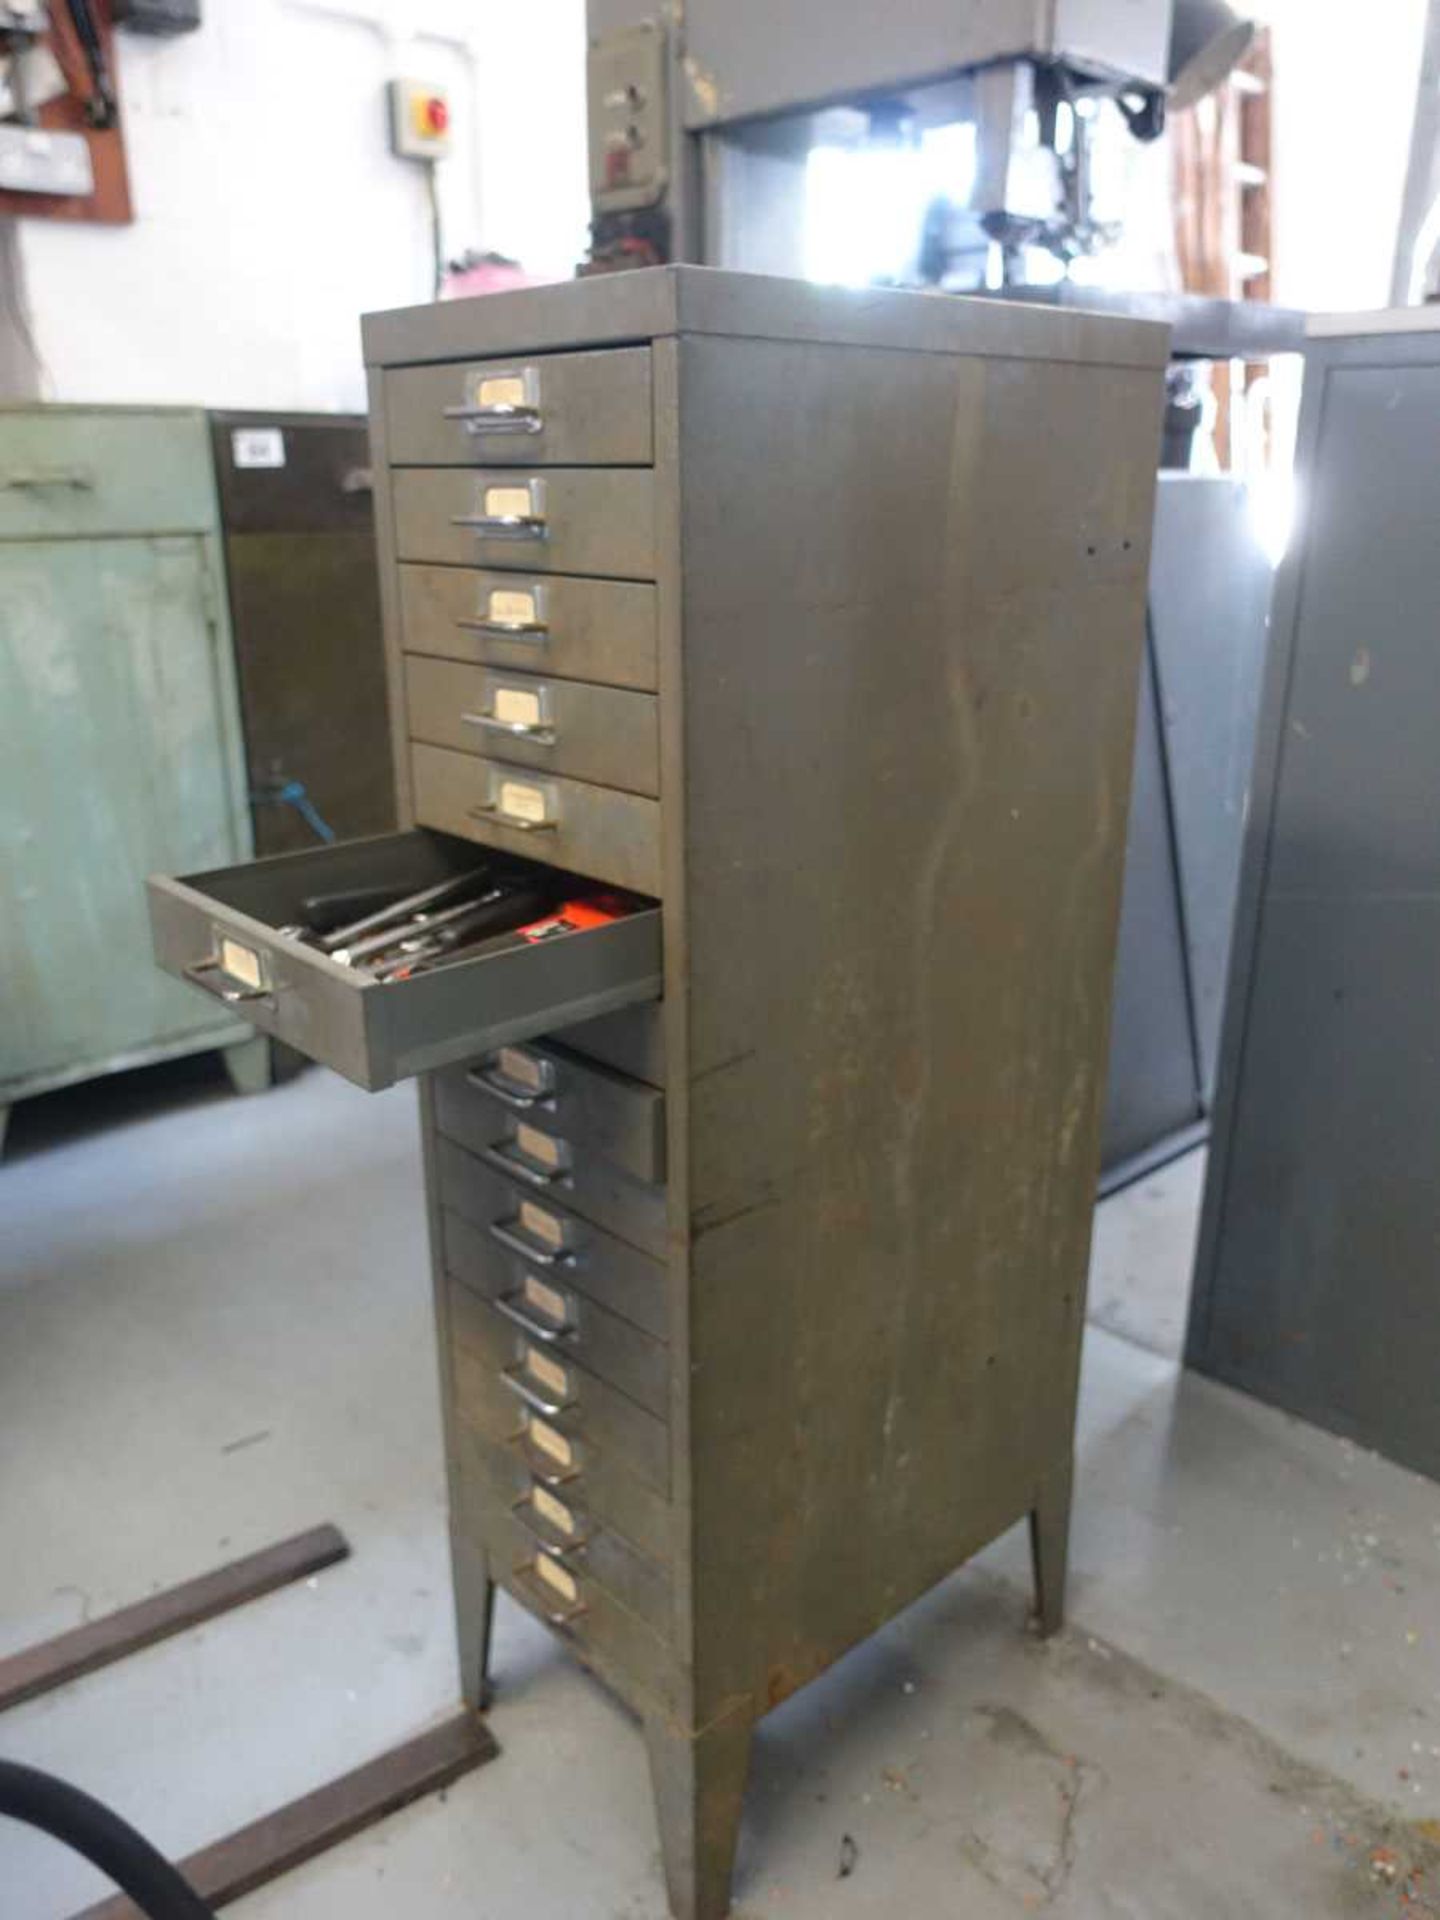 +VAT Bisley 15 drawer filing cabinet and contents including tools etc.